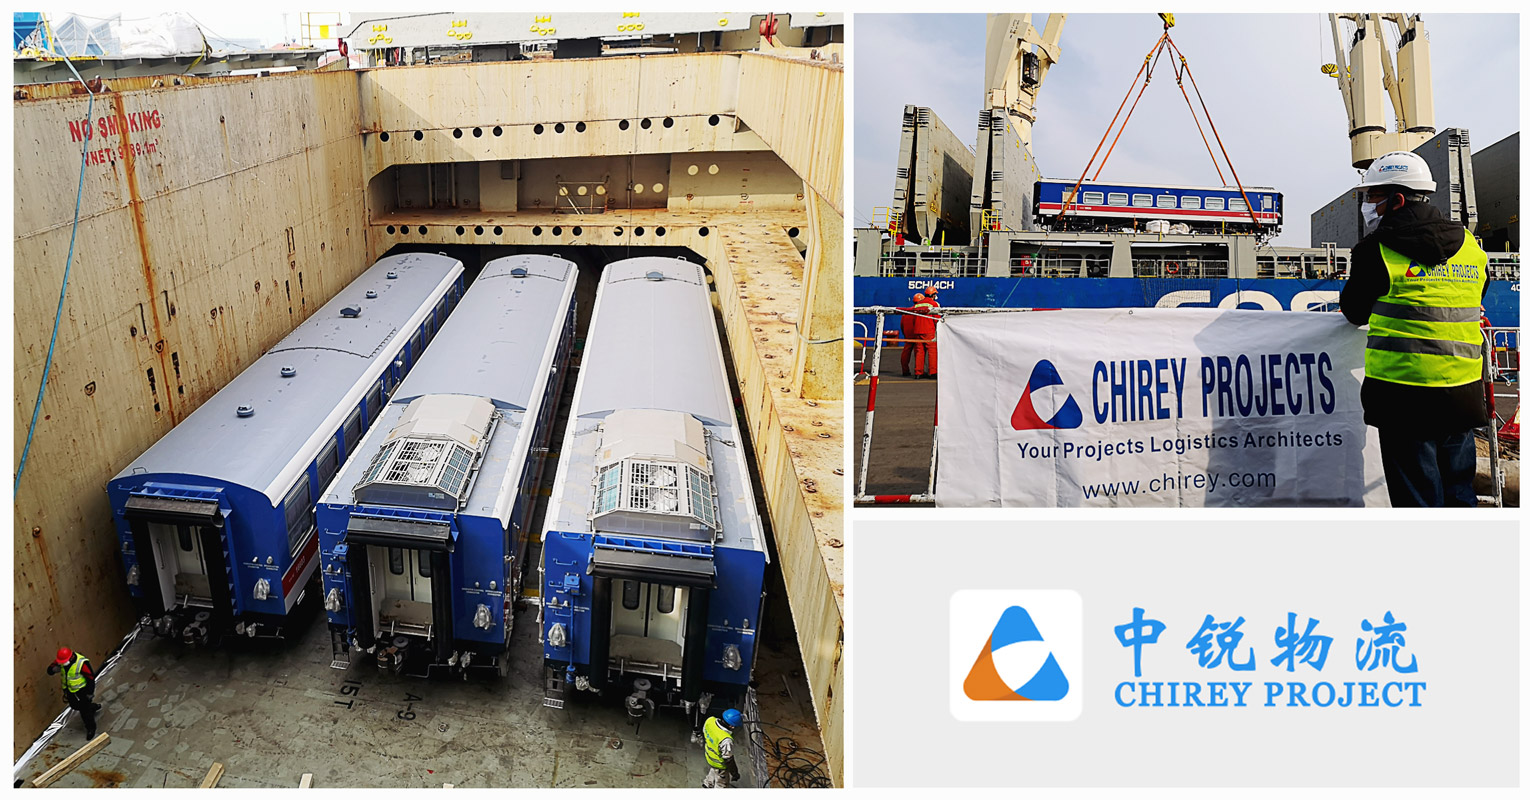 Chirey Projects Transported Several Railcars from a Chinese Factory to End Users